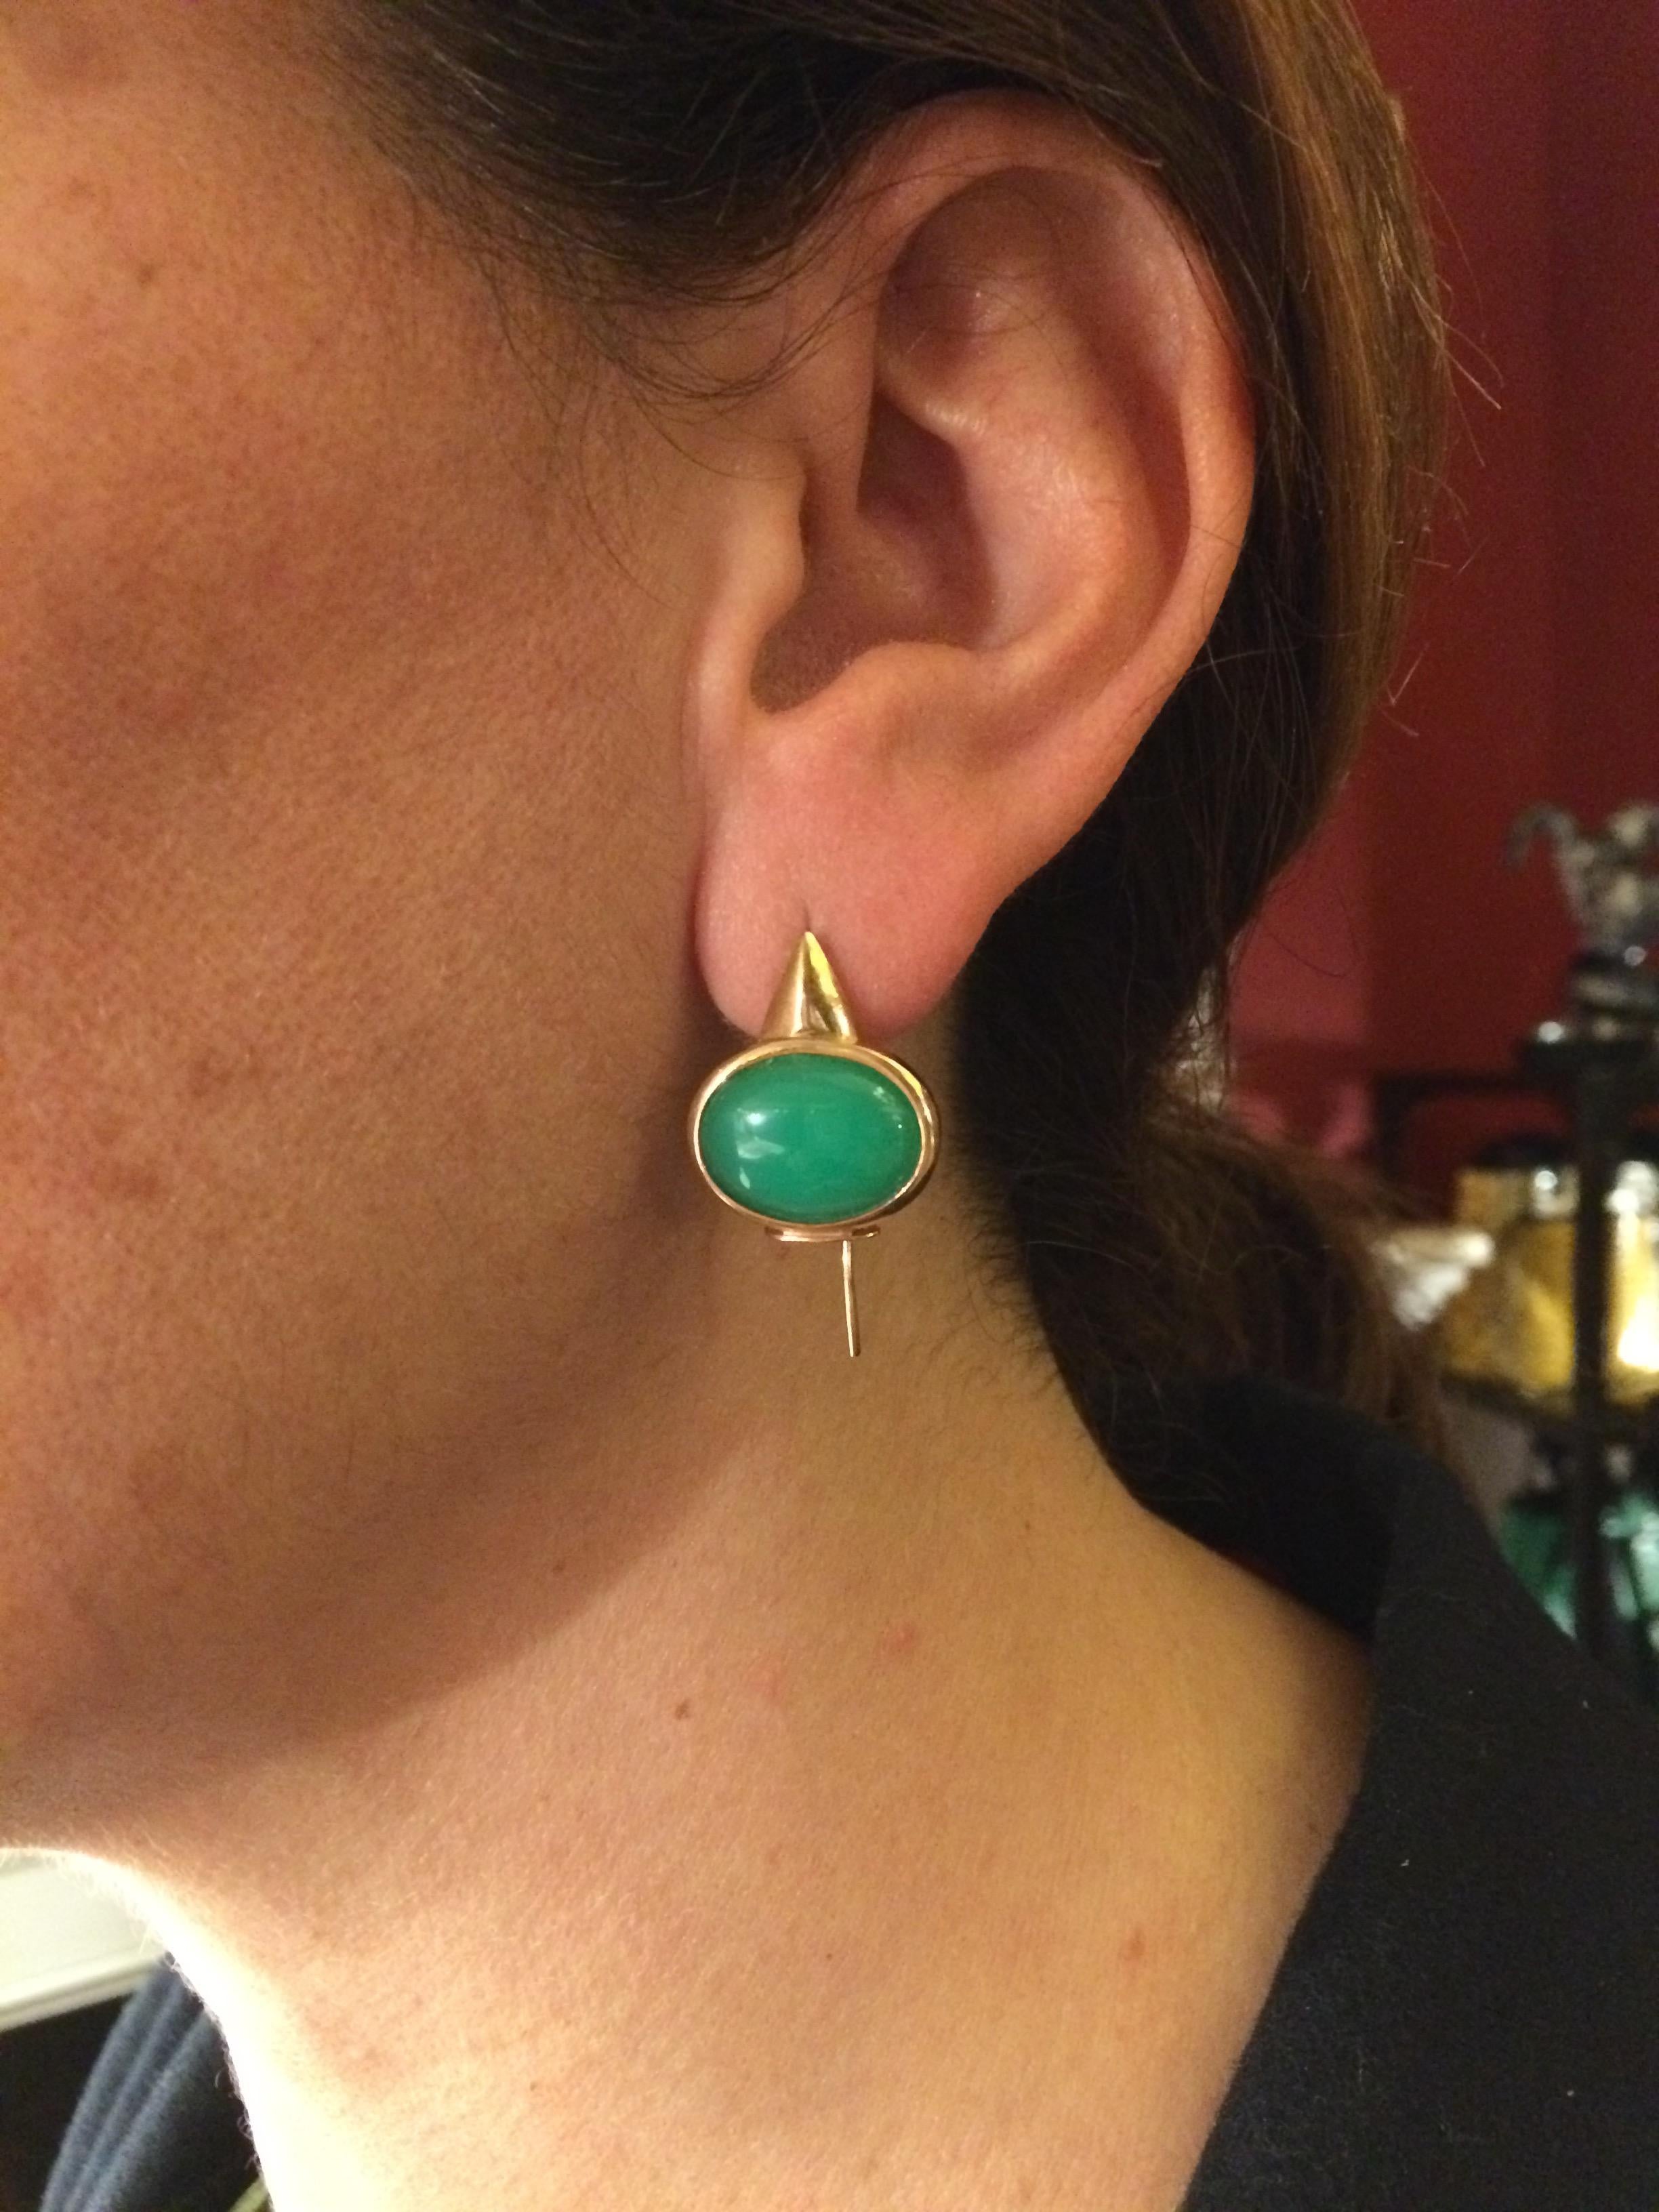 Rossella Ugolini Design Collection Chrysophrase 18 Karat Yellow Gold Stud Modern Lever Back Design Green Earrings.
Handcrafted in 18 karats yellow gold a bright and comfortable lever back earrings.
Chrysoprase is the green stone of sincerity. It